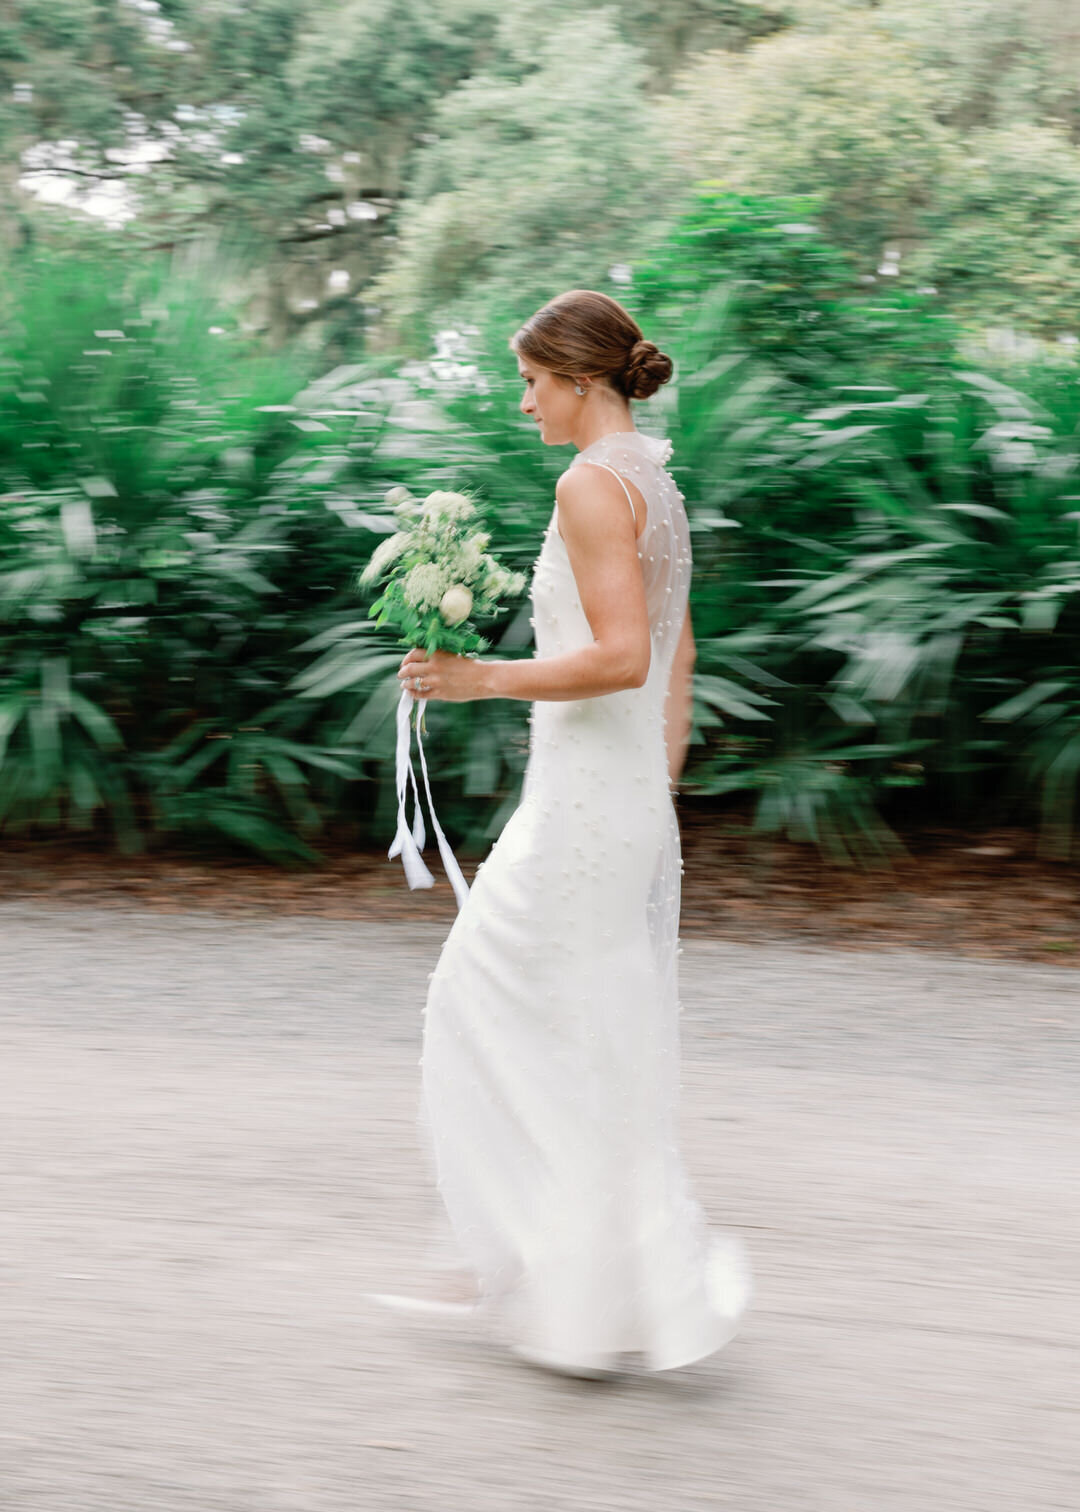 motion blur of bride walking by holding flowers